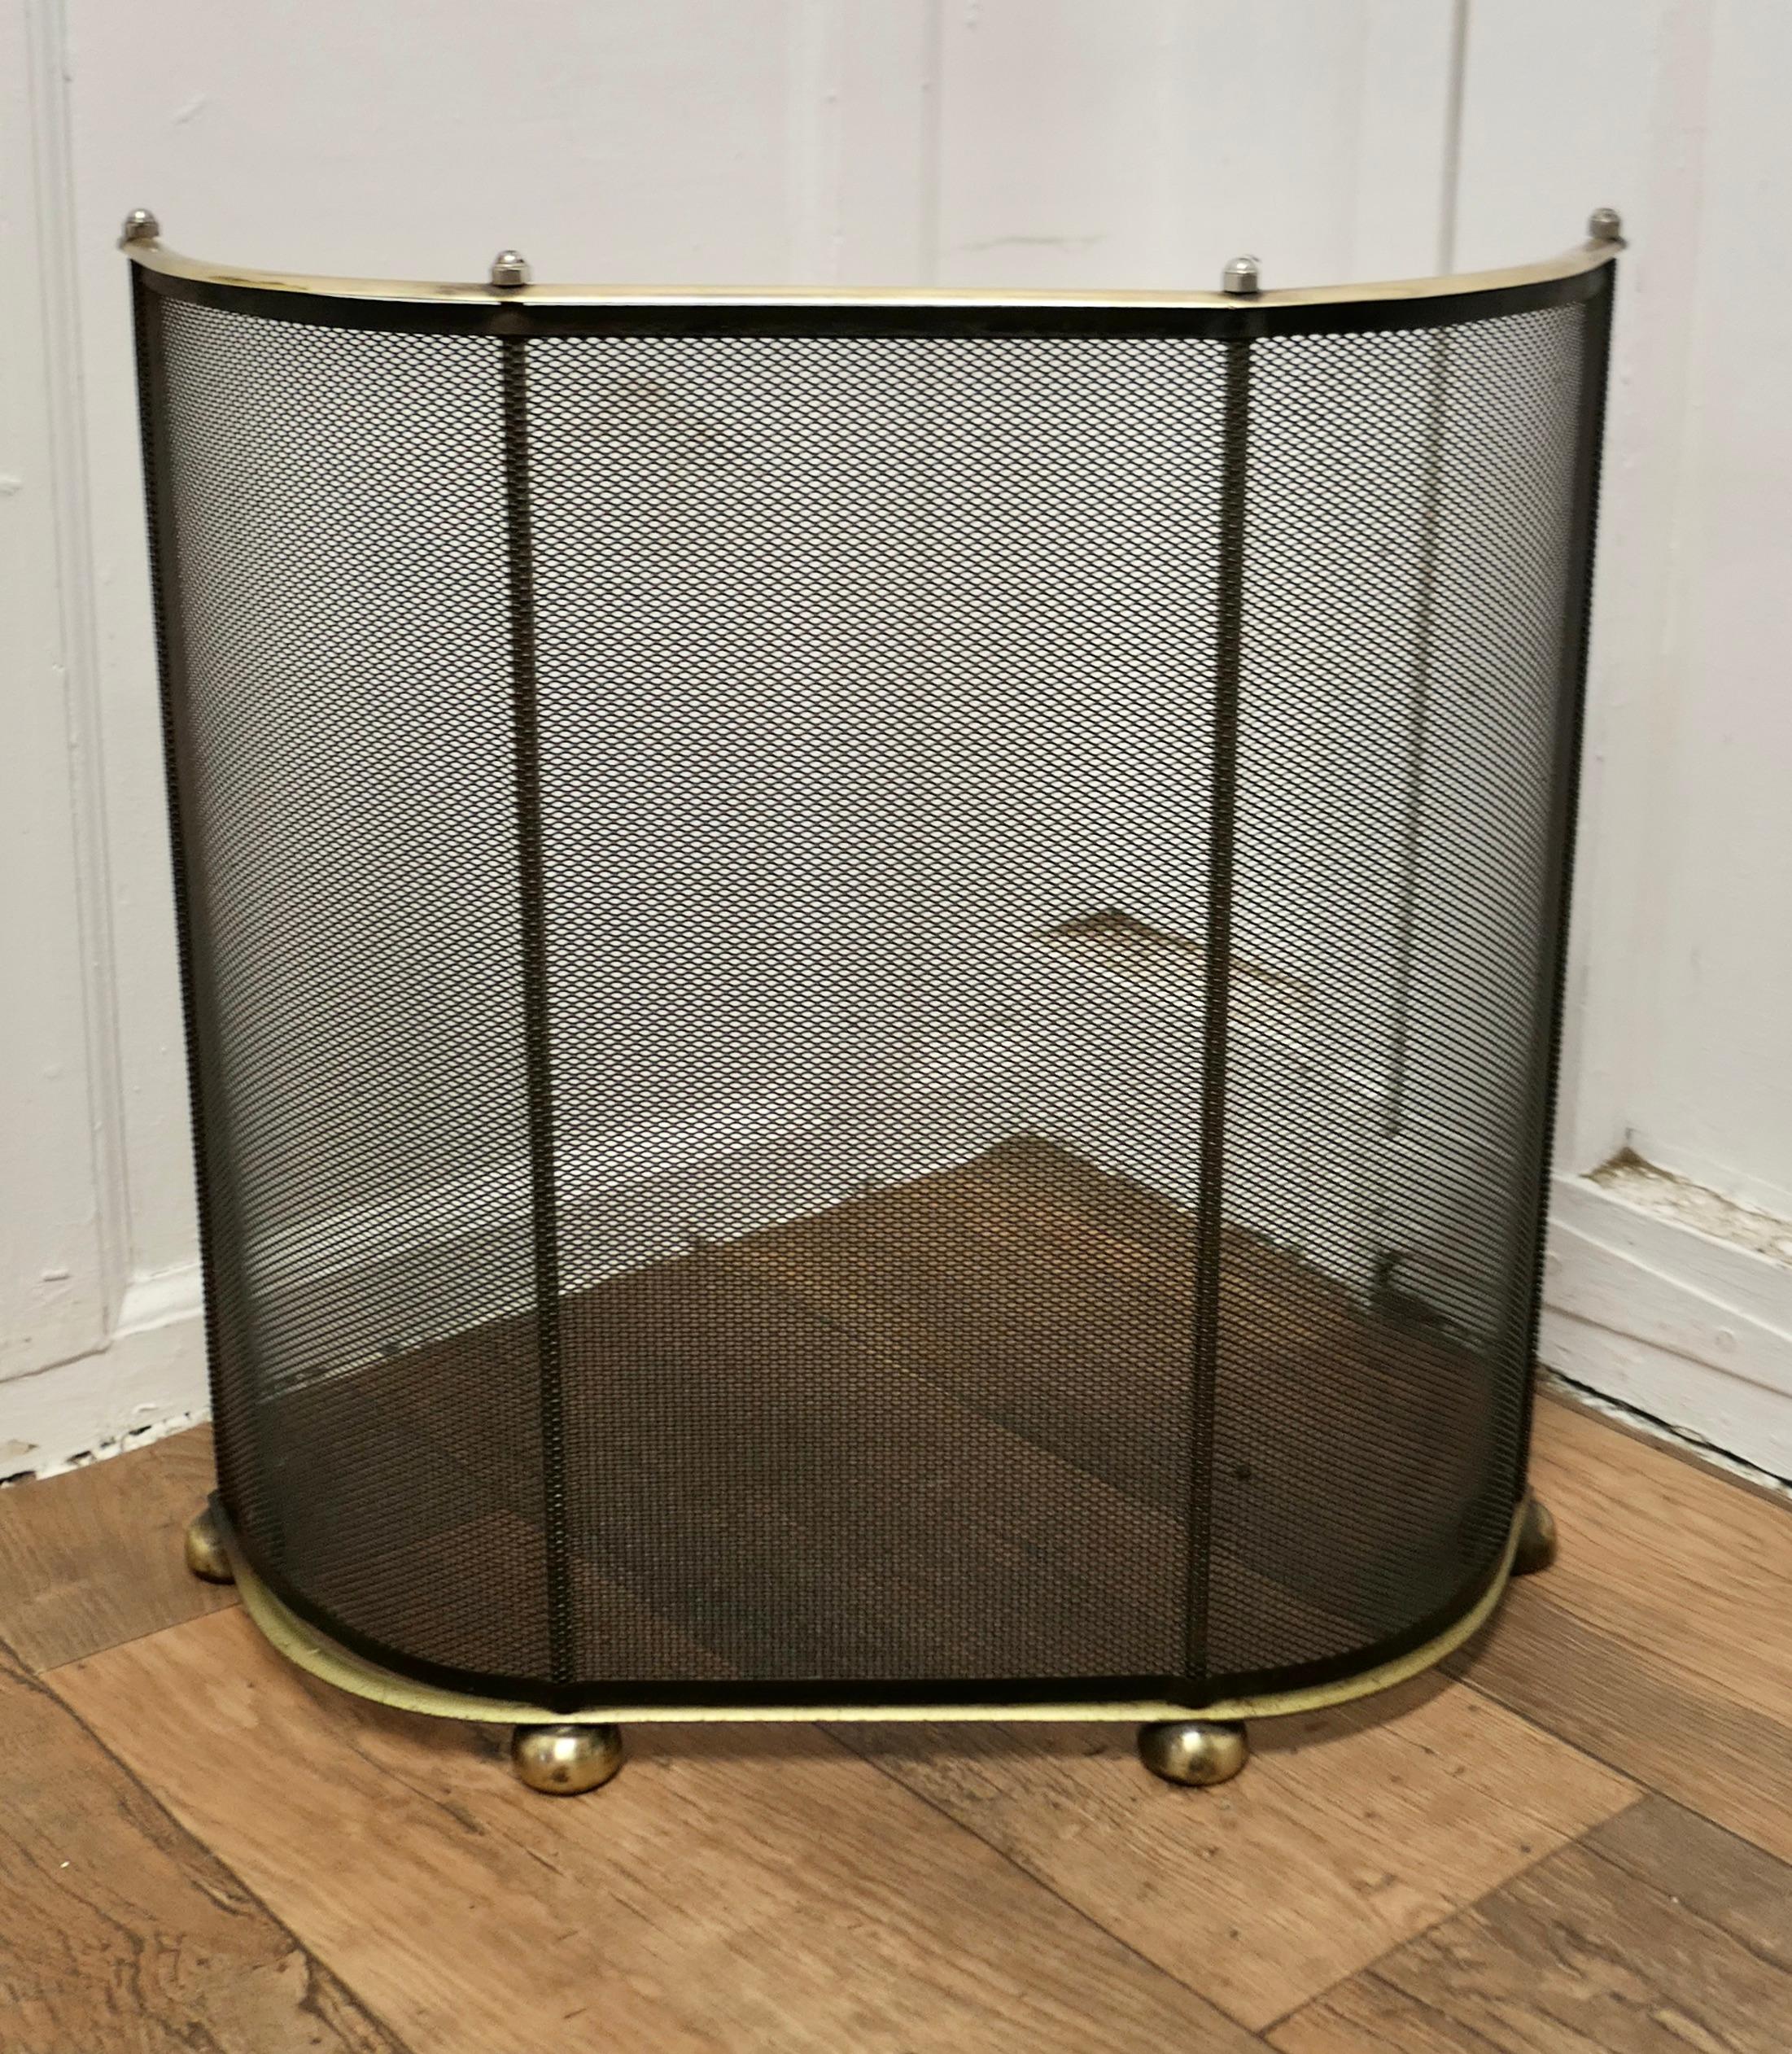  Curved Brass and Iron Nursery Fire Guard

This fire guard has a curved shape to surround  the fire
The iron guard has a black mesh infill and a brass top rail, the fender is in good all round condition  
 The fender is 21” high, 7” deep and 21”